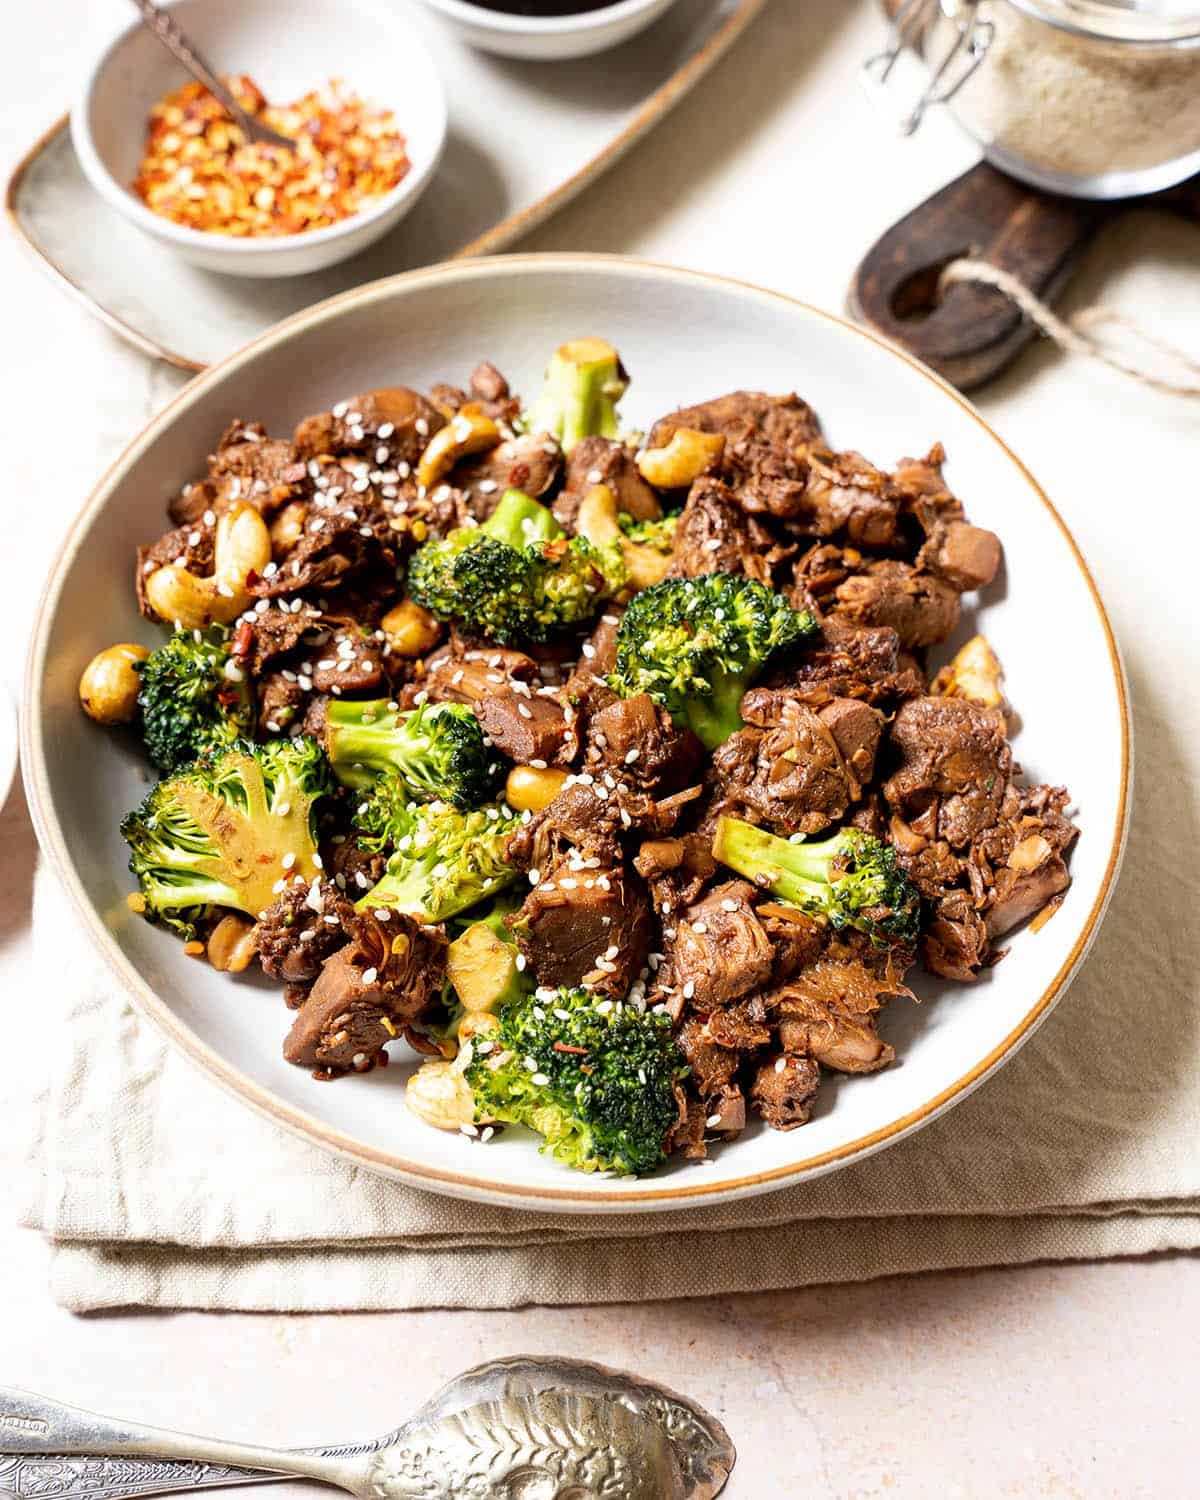 Vegan beef and broccoli topped with sesame seeds in a bowl.